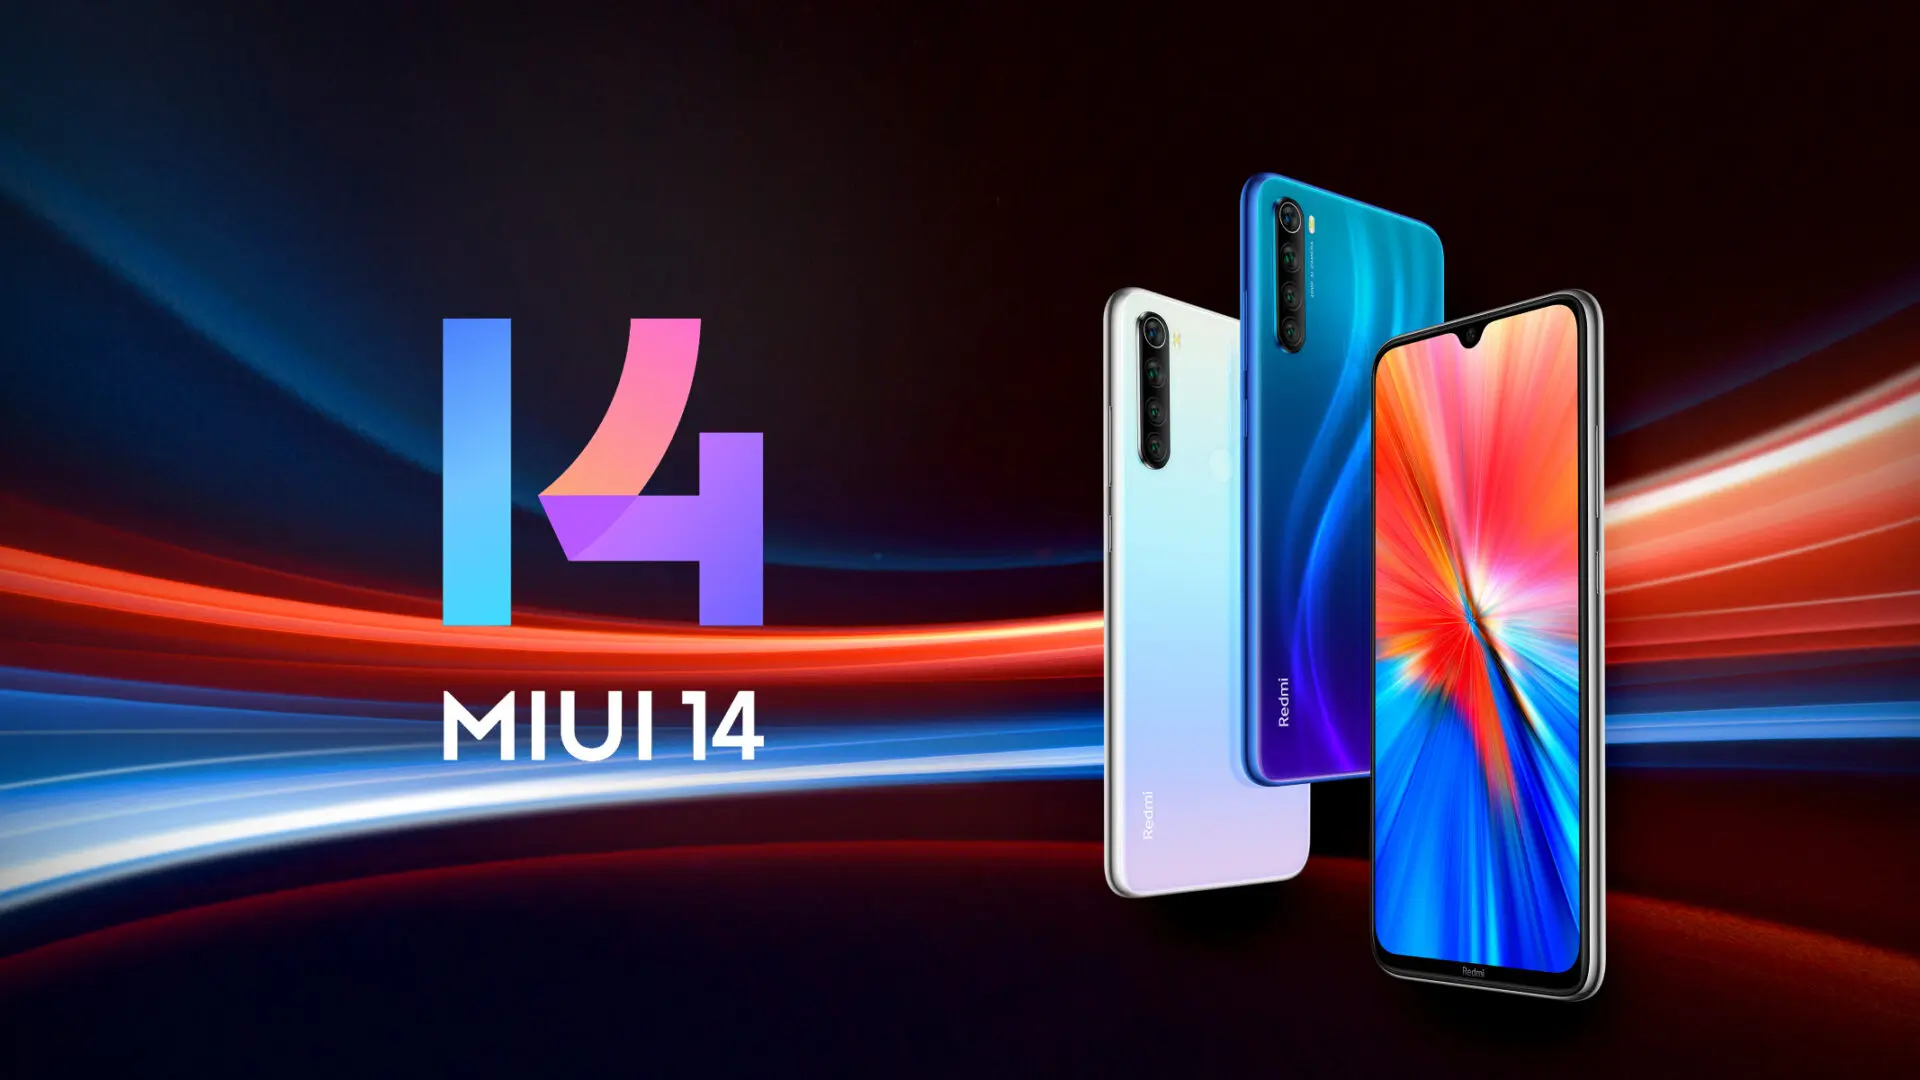 One of the Redmi Note 8 smartphones will soon get a stable global MIUI 14 powered by Android 13